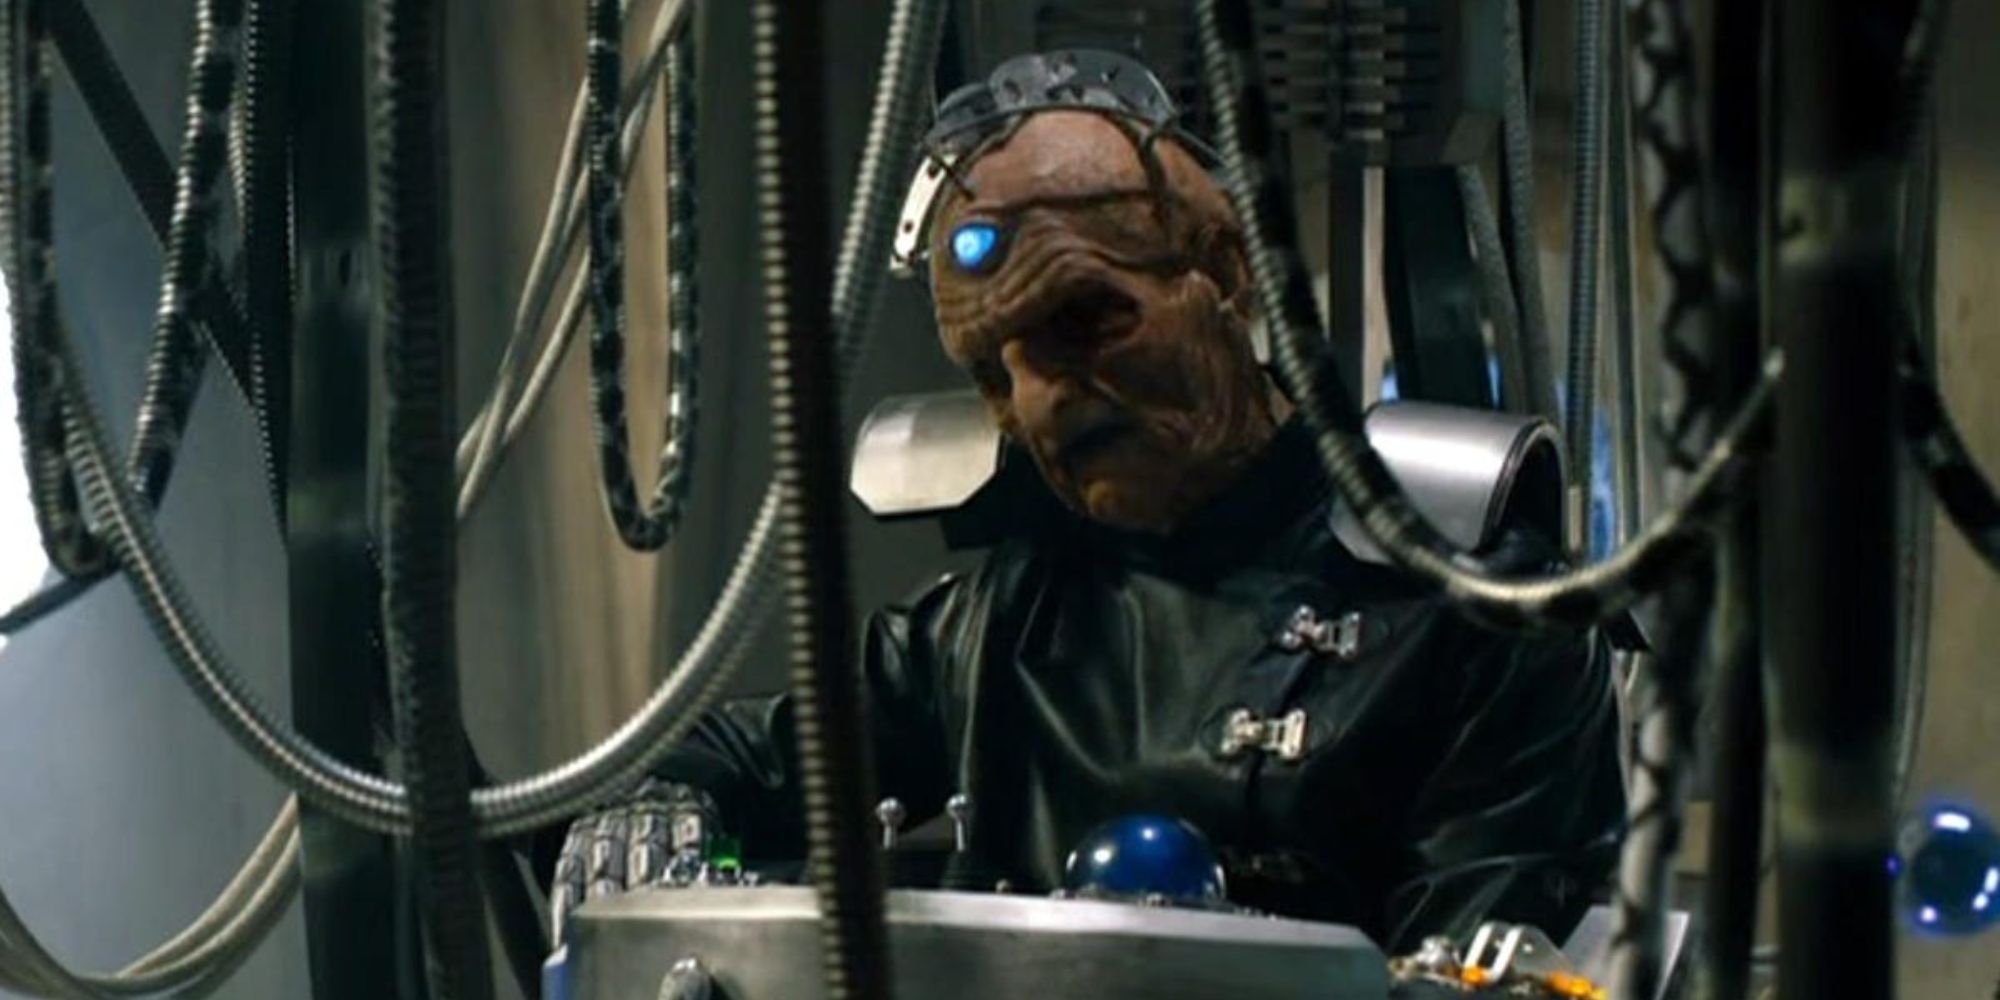 Davros surrounded by wires and tubes